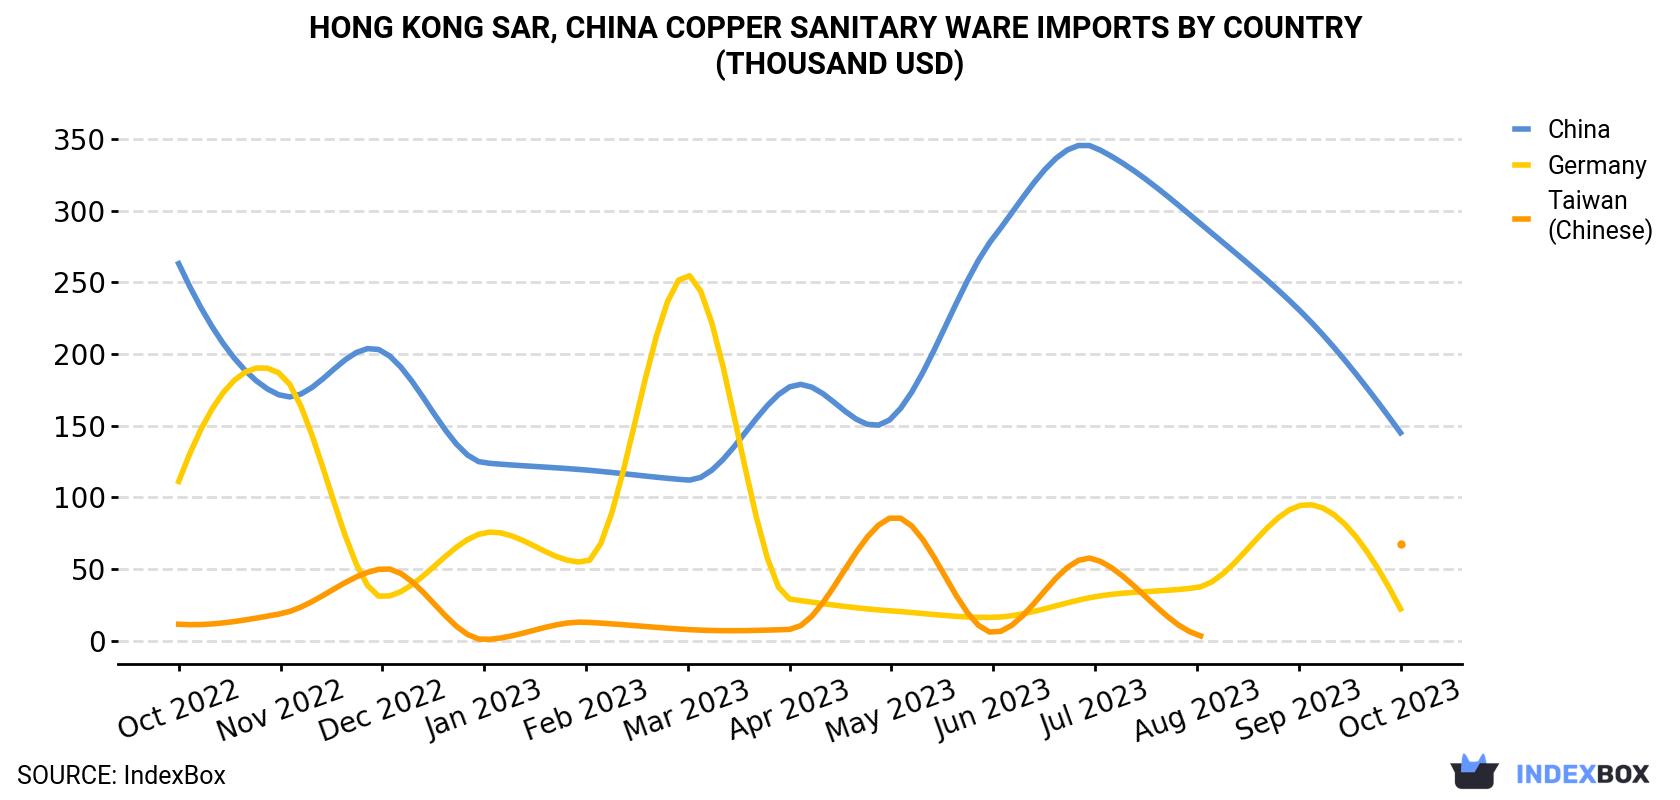 Hong Kong Copper Sanitary Ware Imports By Country (Thousand USD)